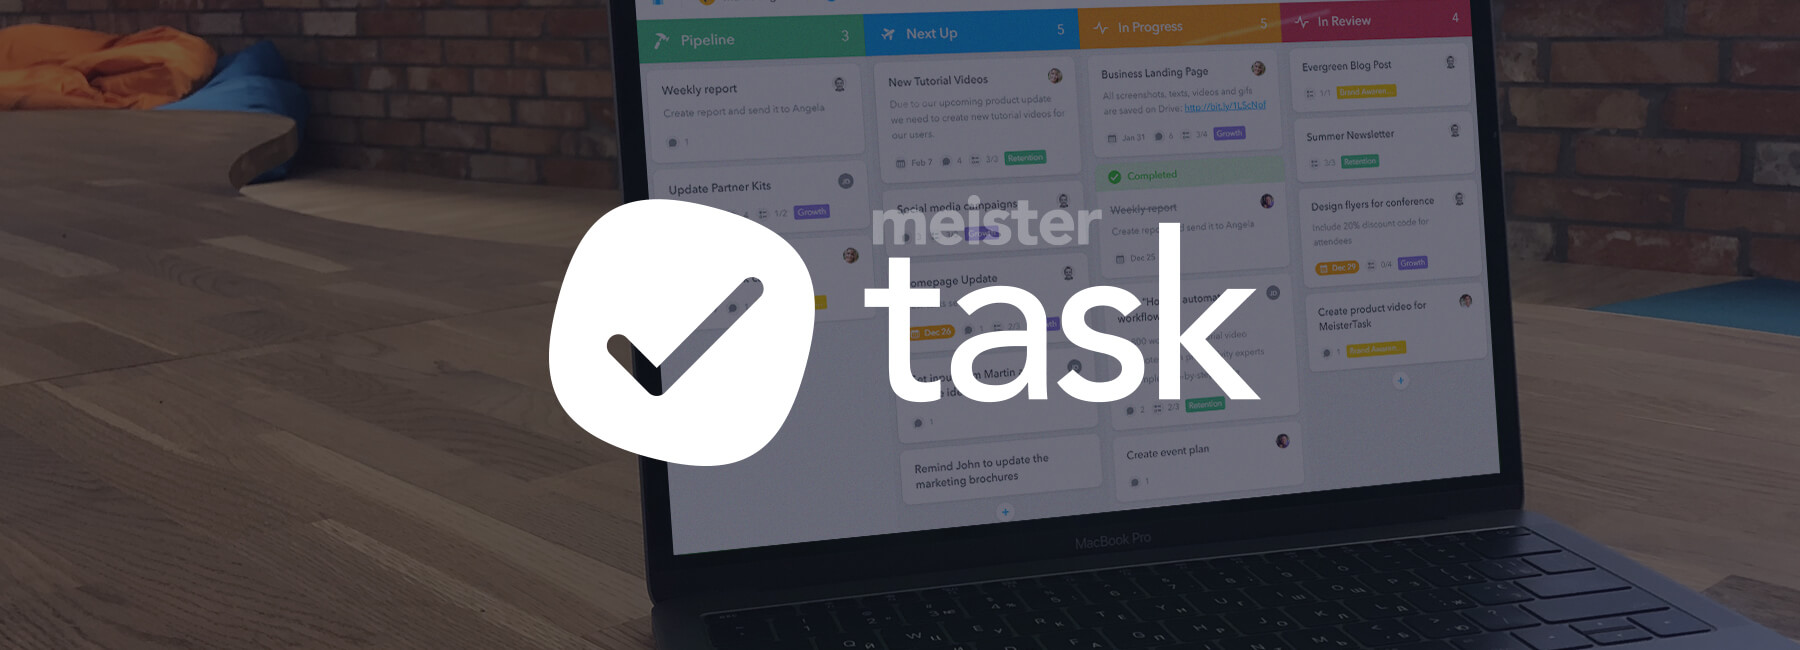 How MeisterTask transformed its user experience with Mopinion feedback